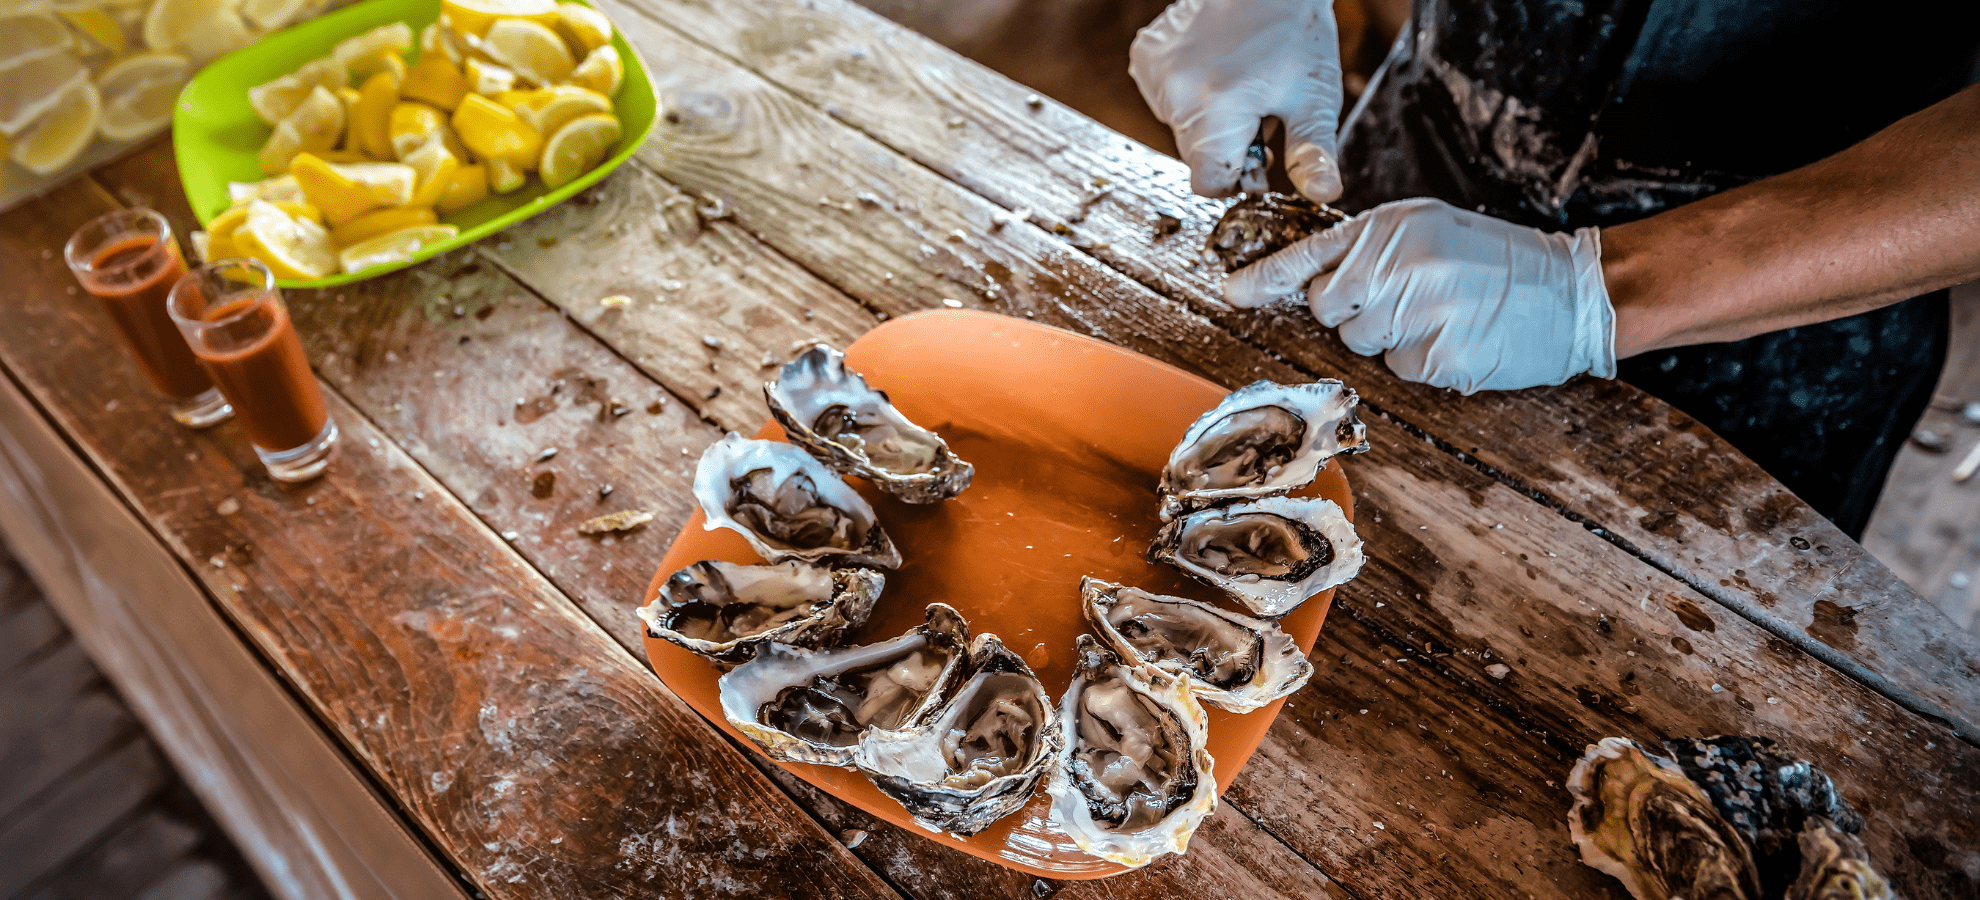 Get Shucked Up at Noizy Oysters Bar & Grill